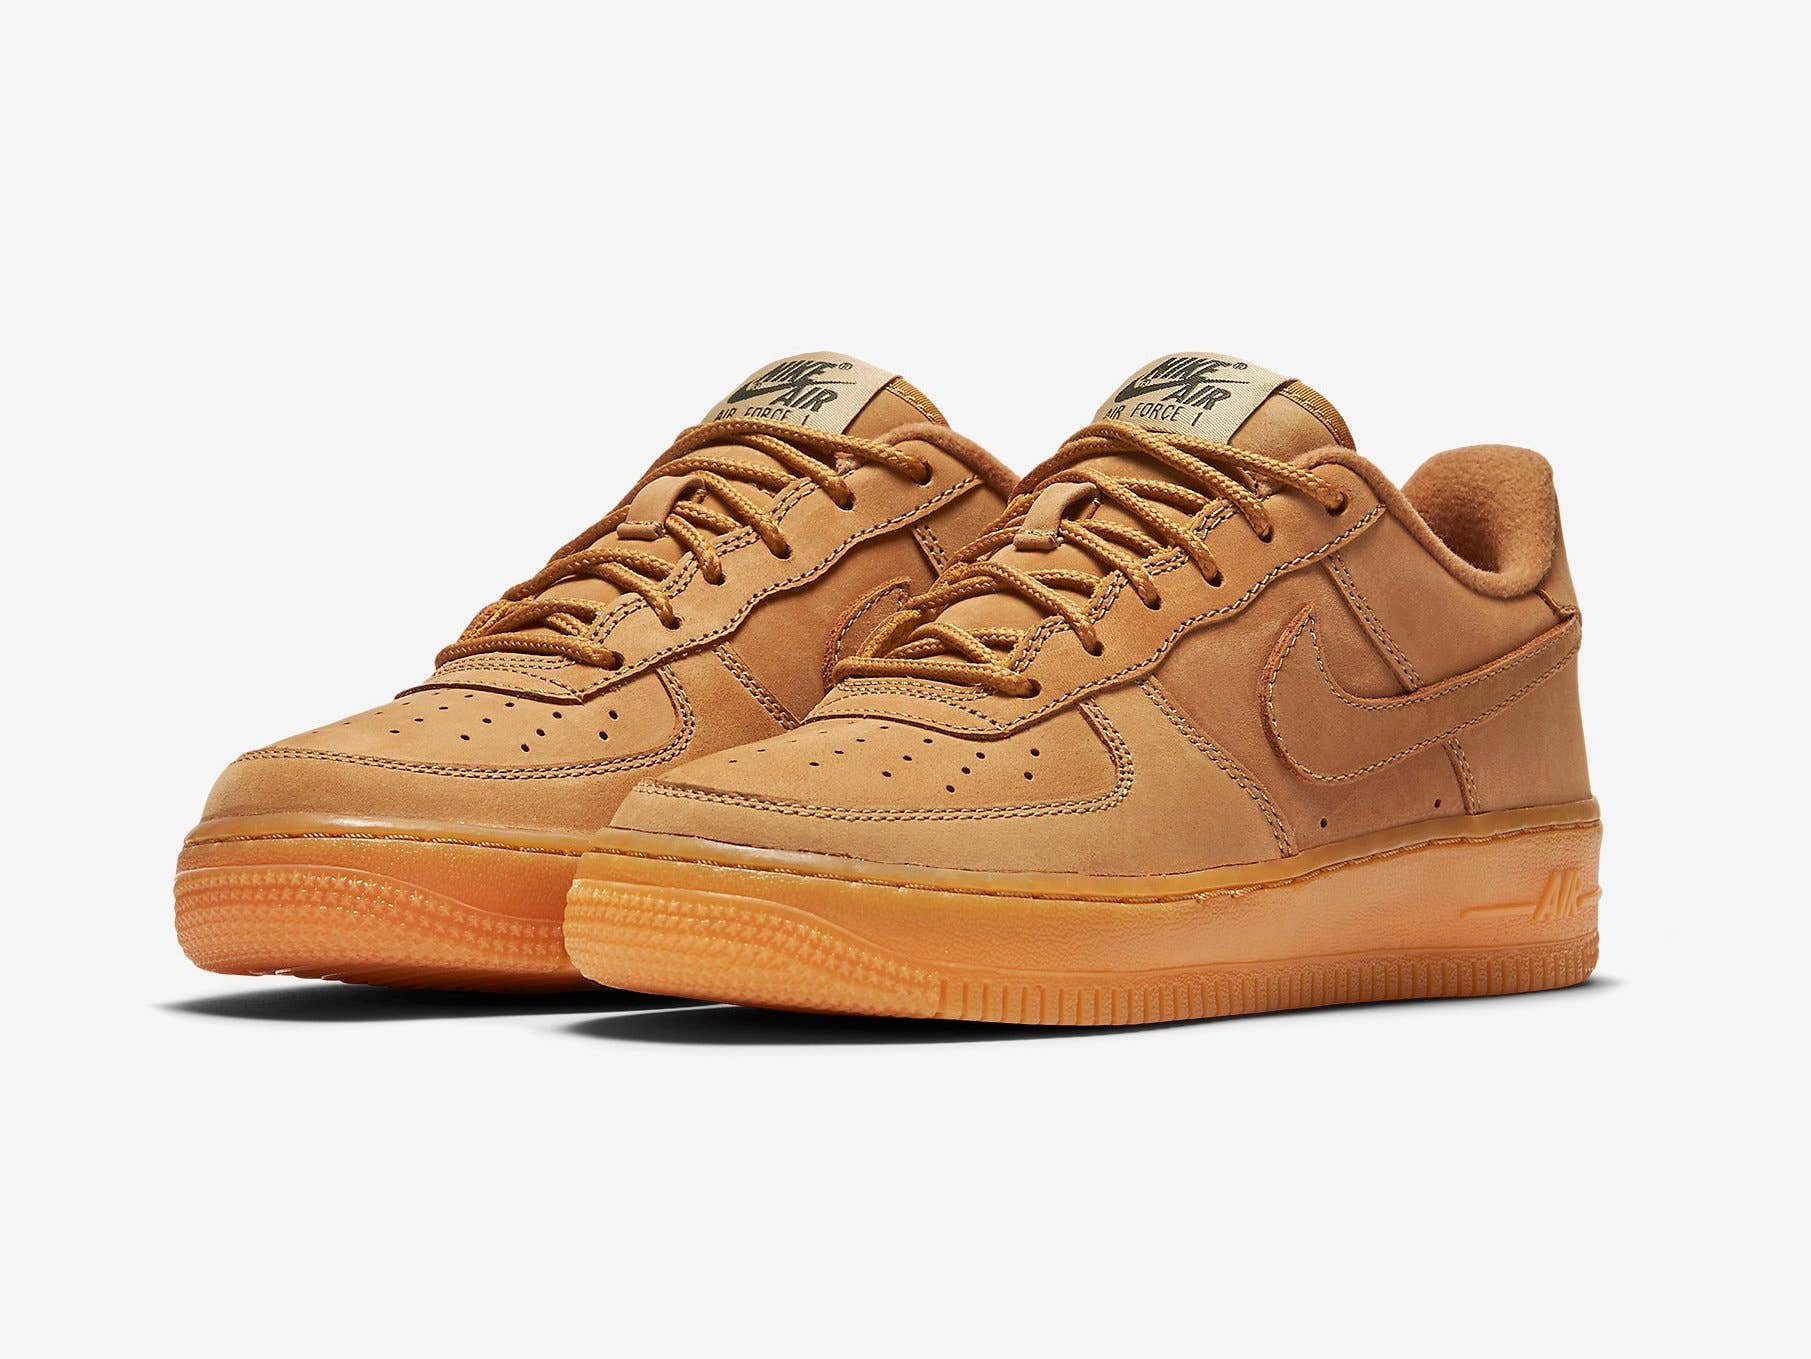 Nike Air Force 1 Low GS "Flax"